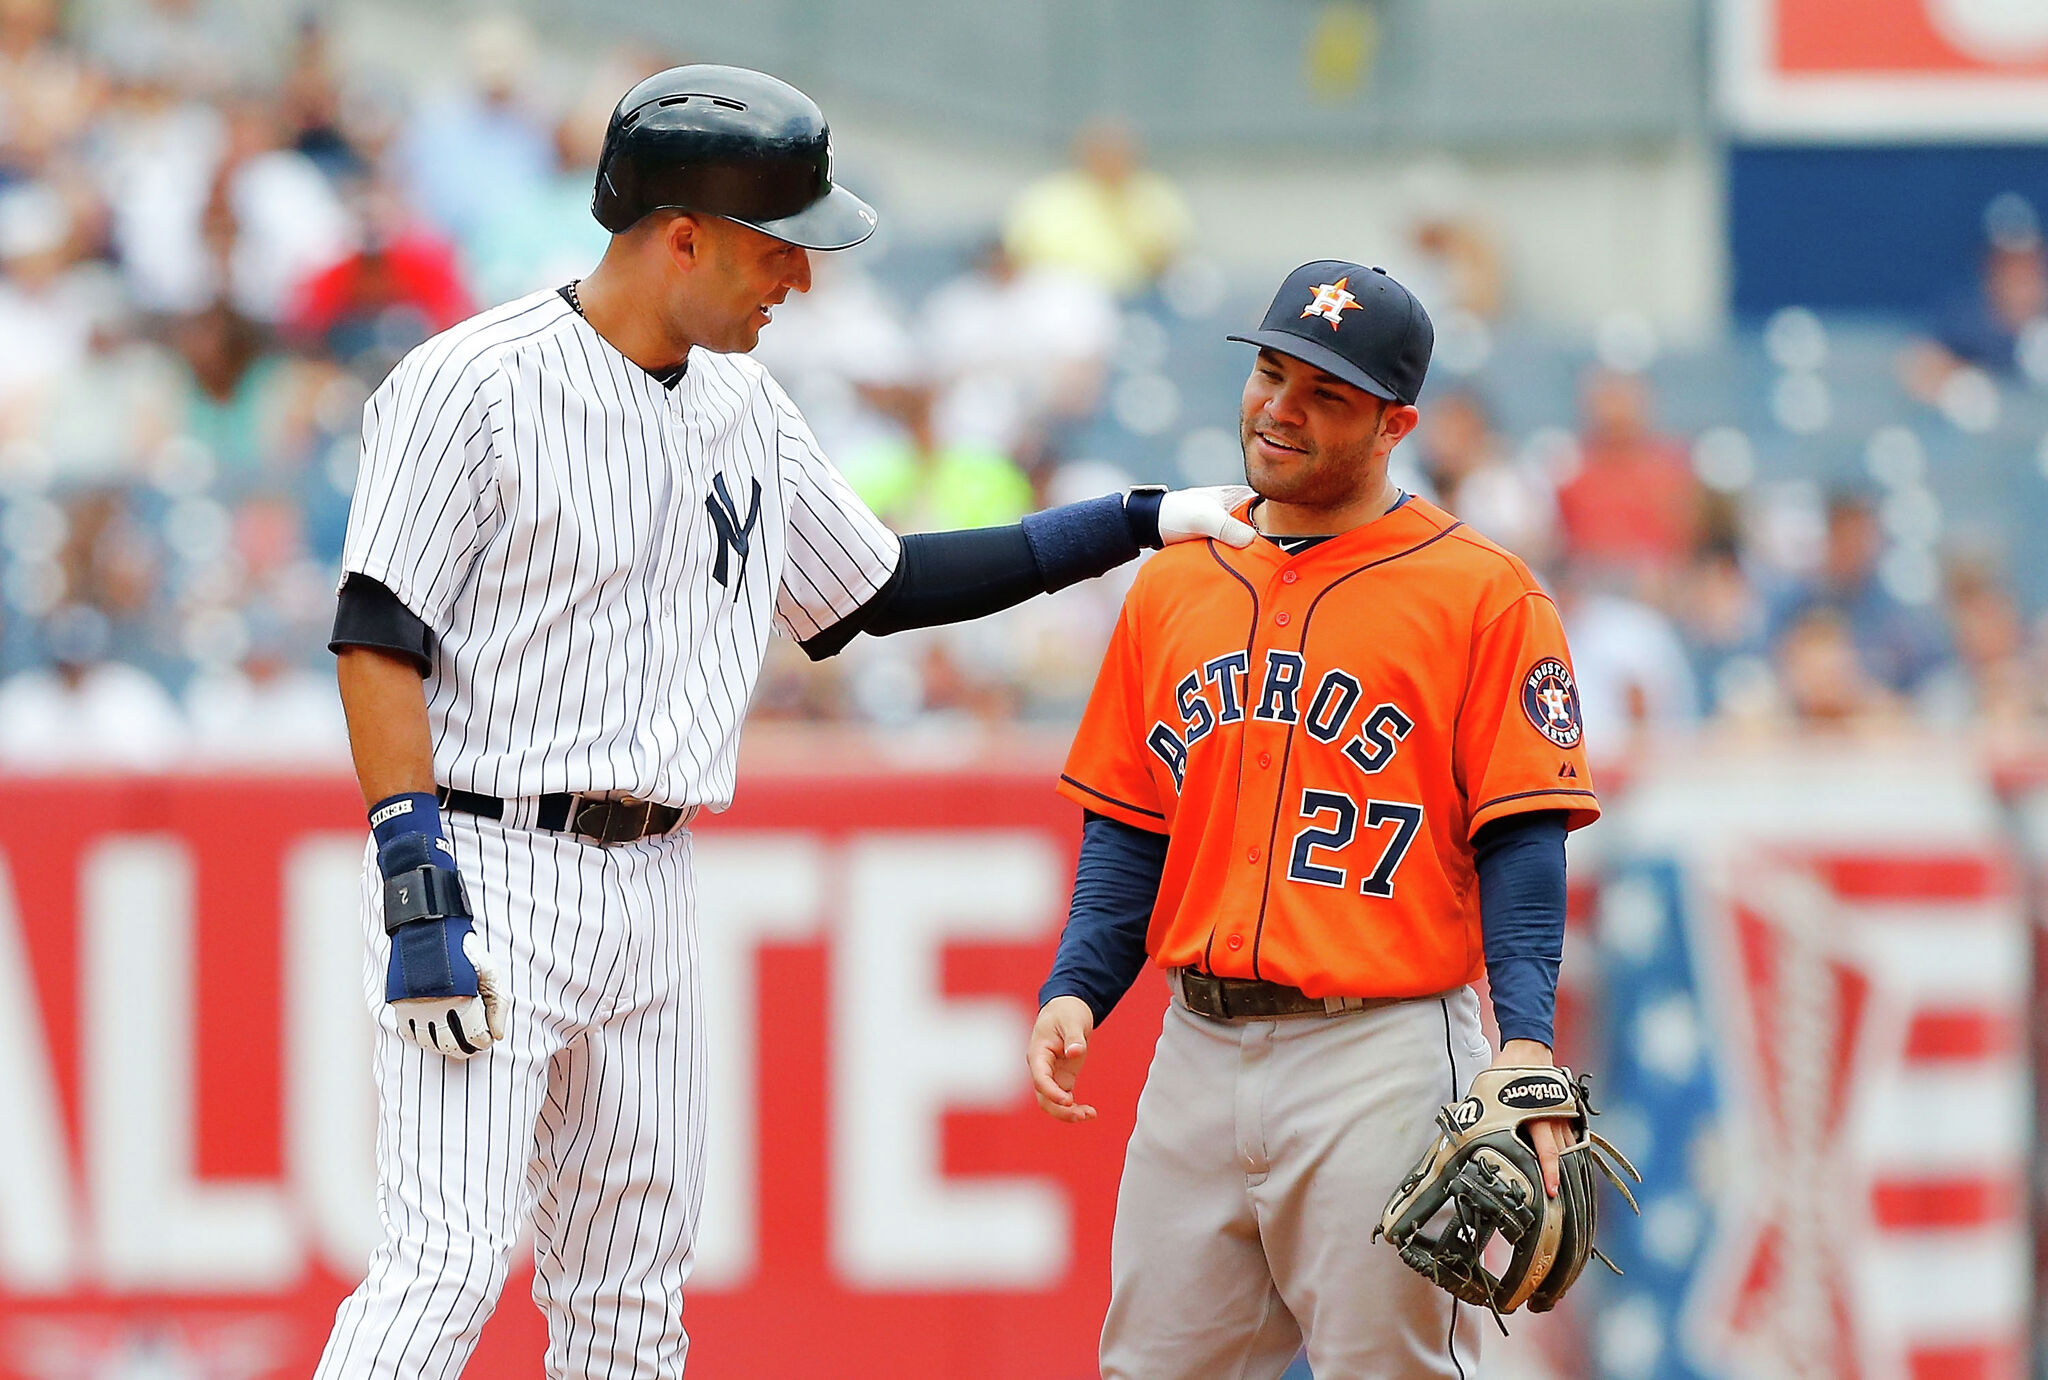 Yankees explains why Astros are still AL's top contender